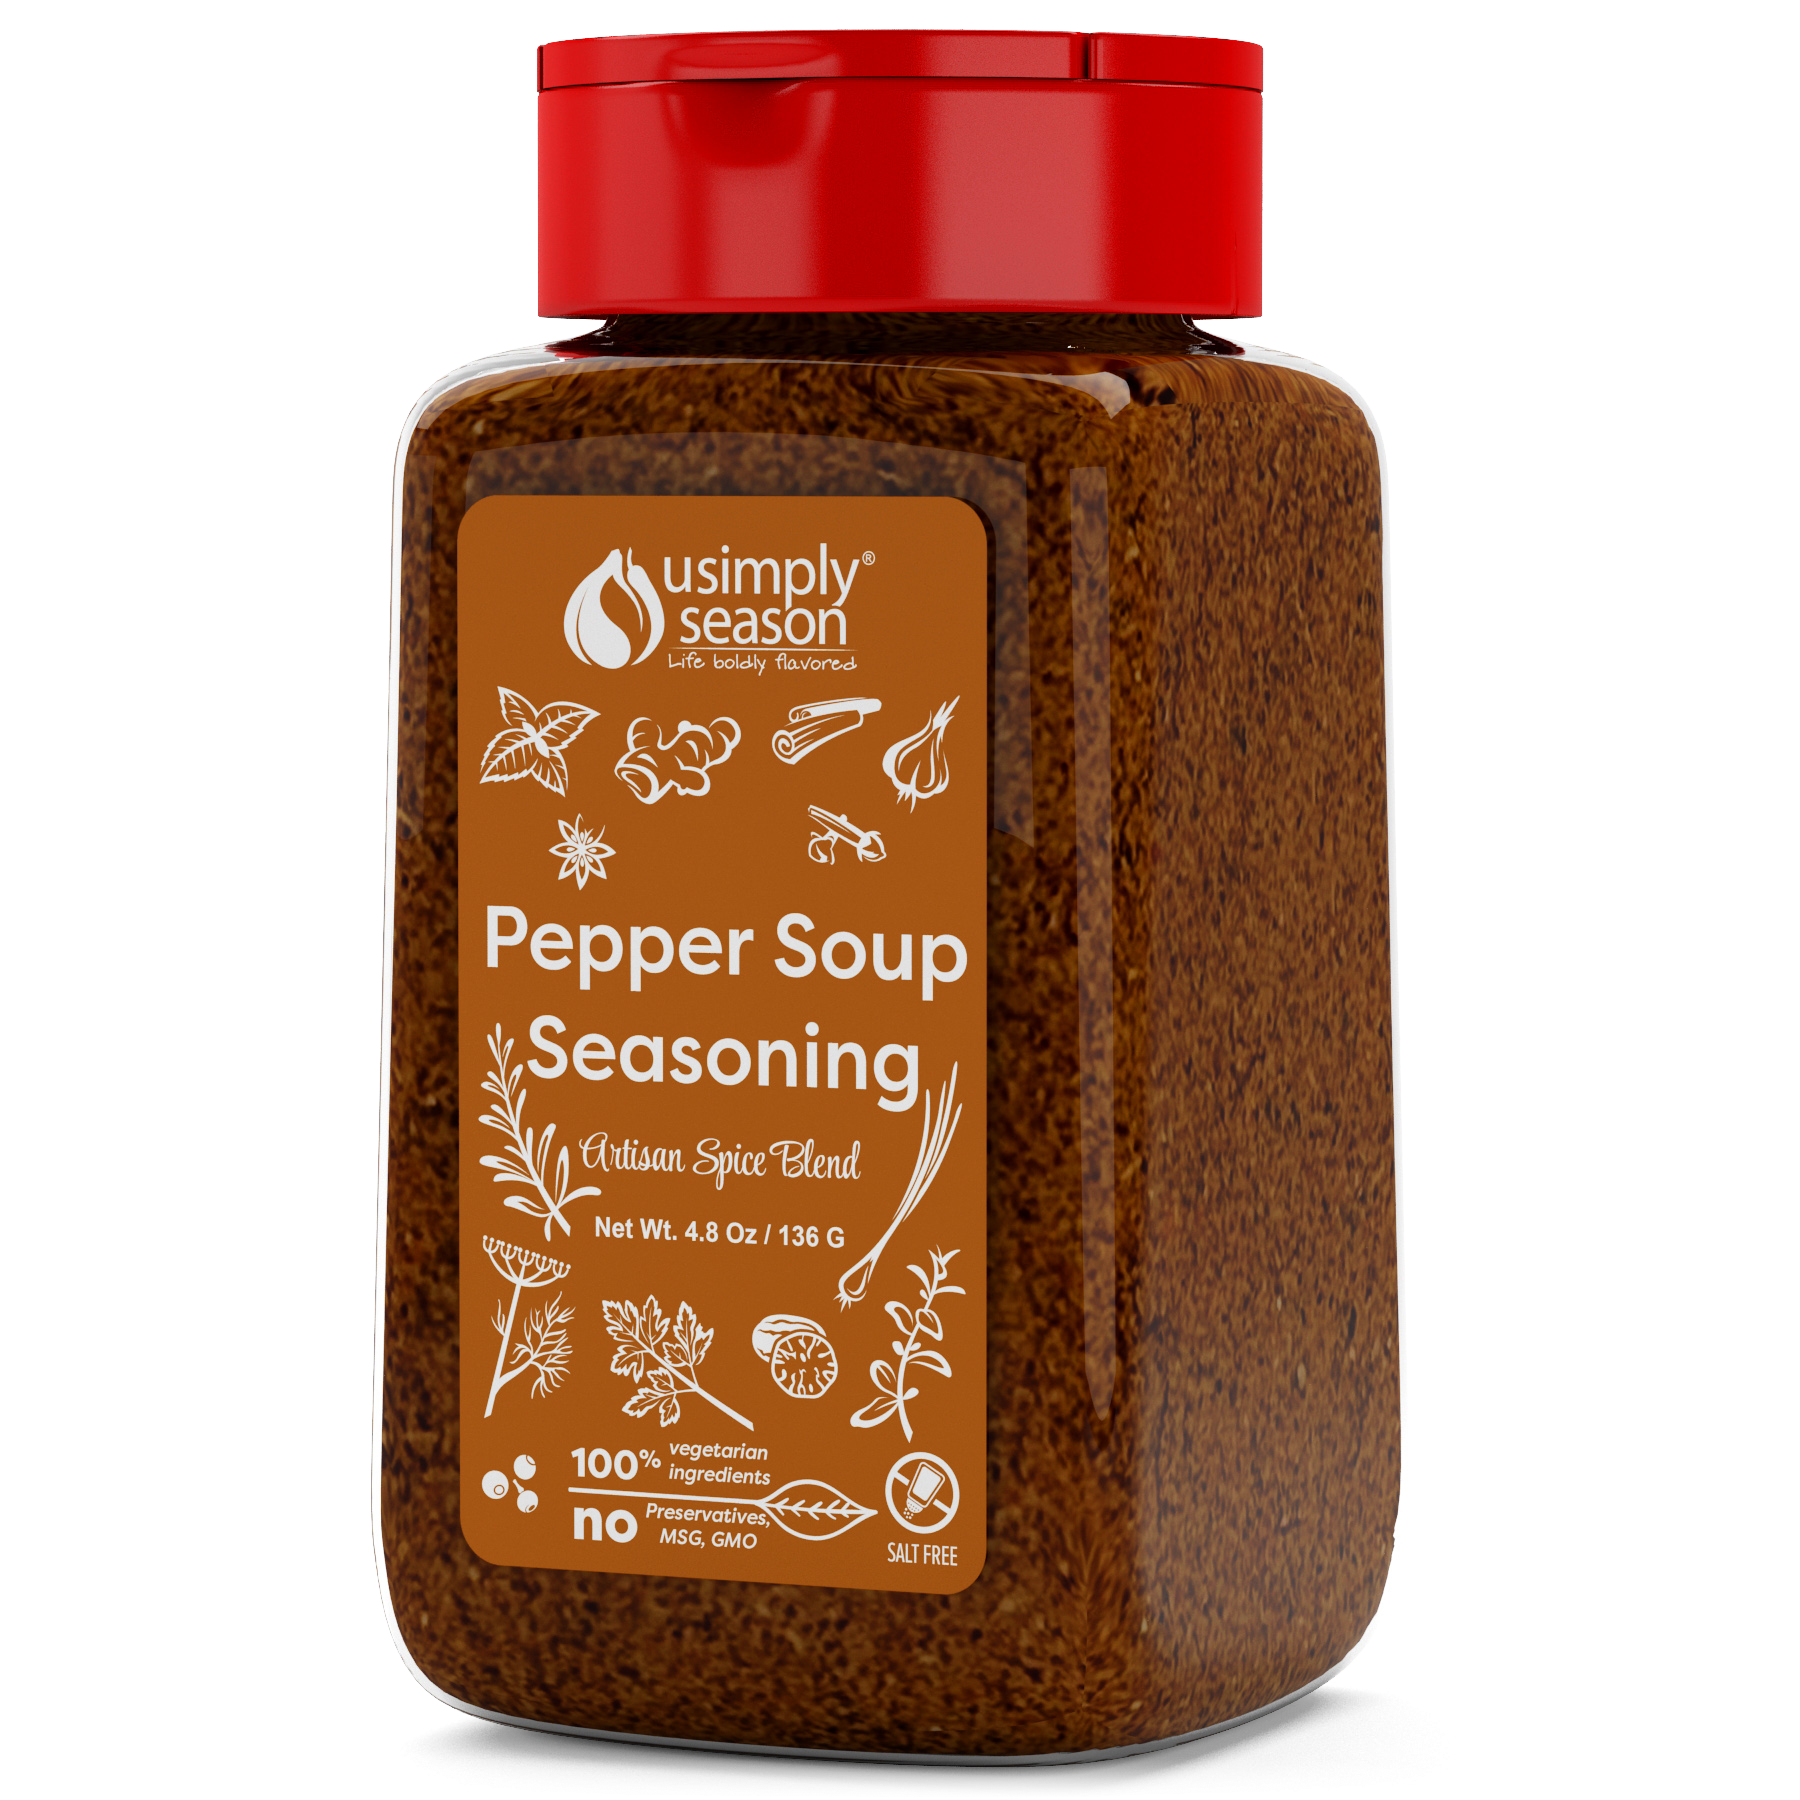 USimplySeason Pepper Soup Seasoning - An Aromatic West African Spice Mix, 4.8oz